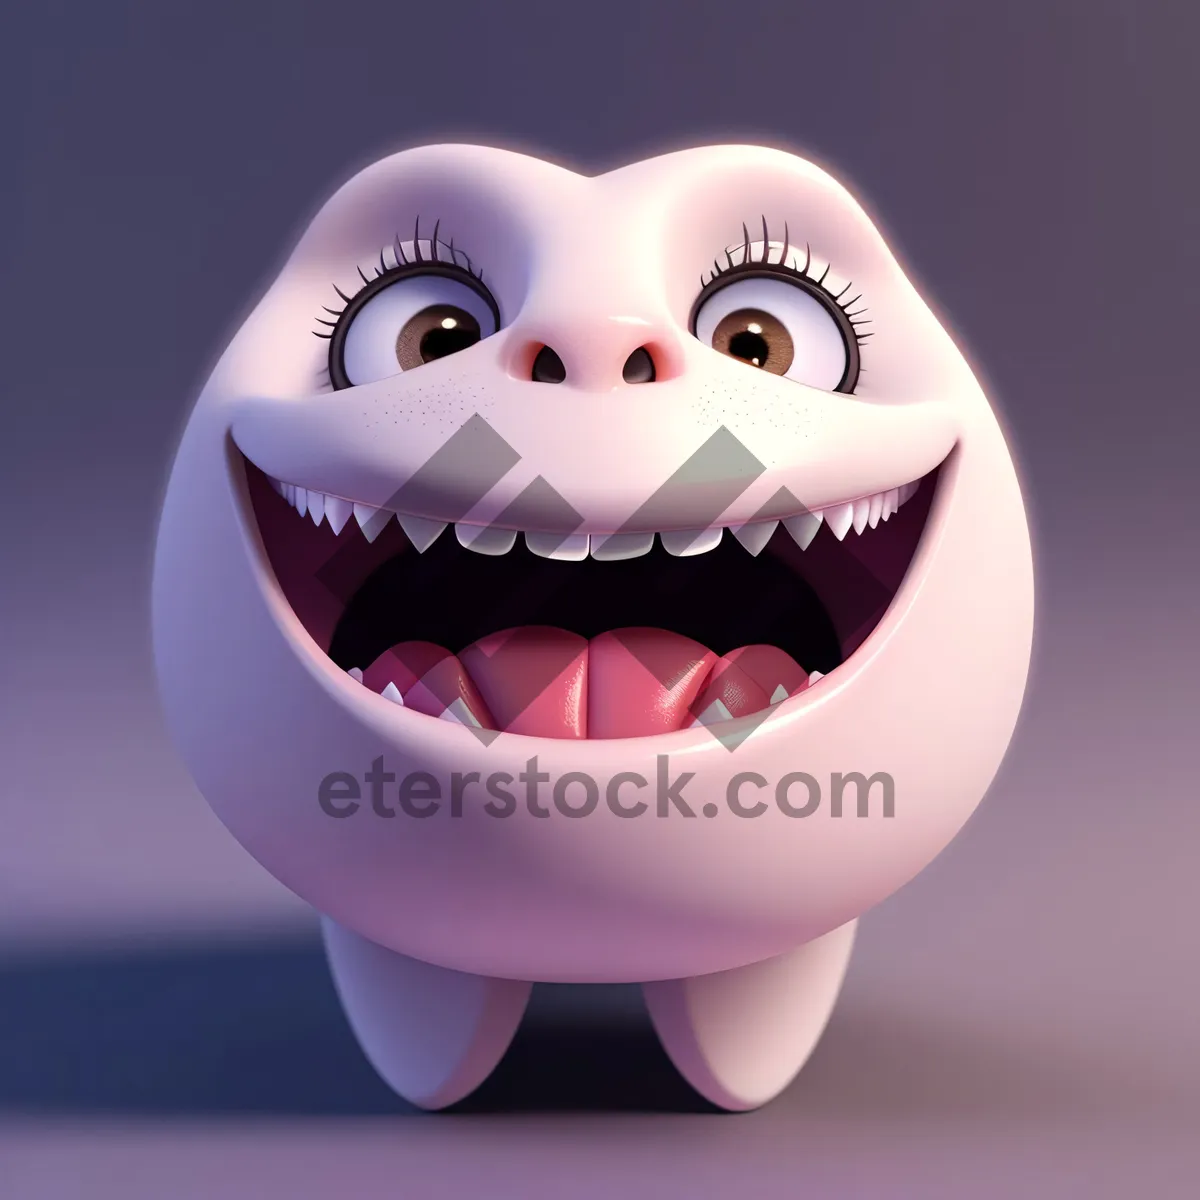 Picture of Pink Piggy Bank with Money - Savings and Finance Symbol